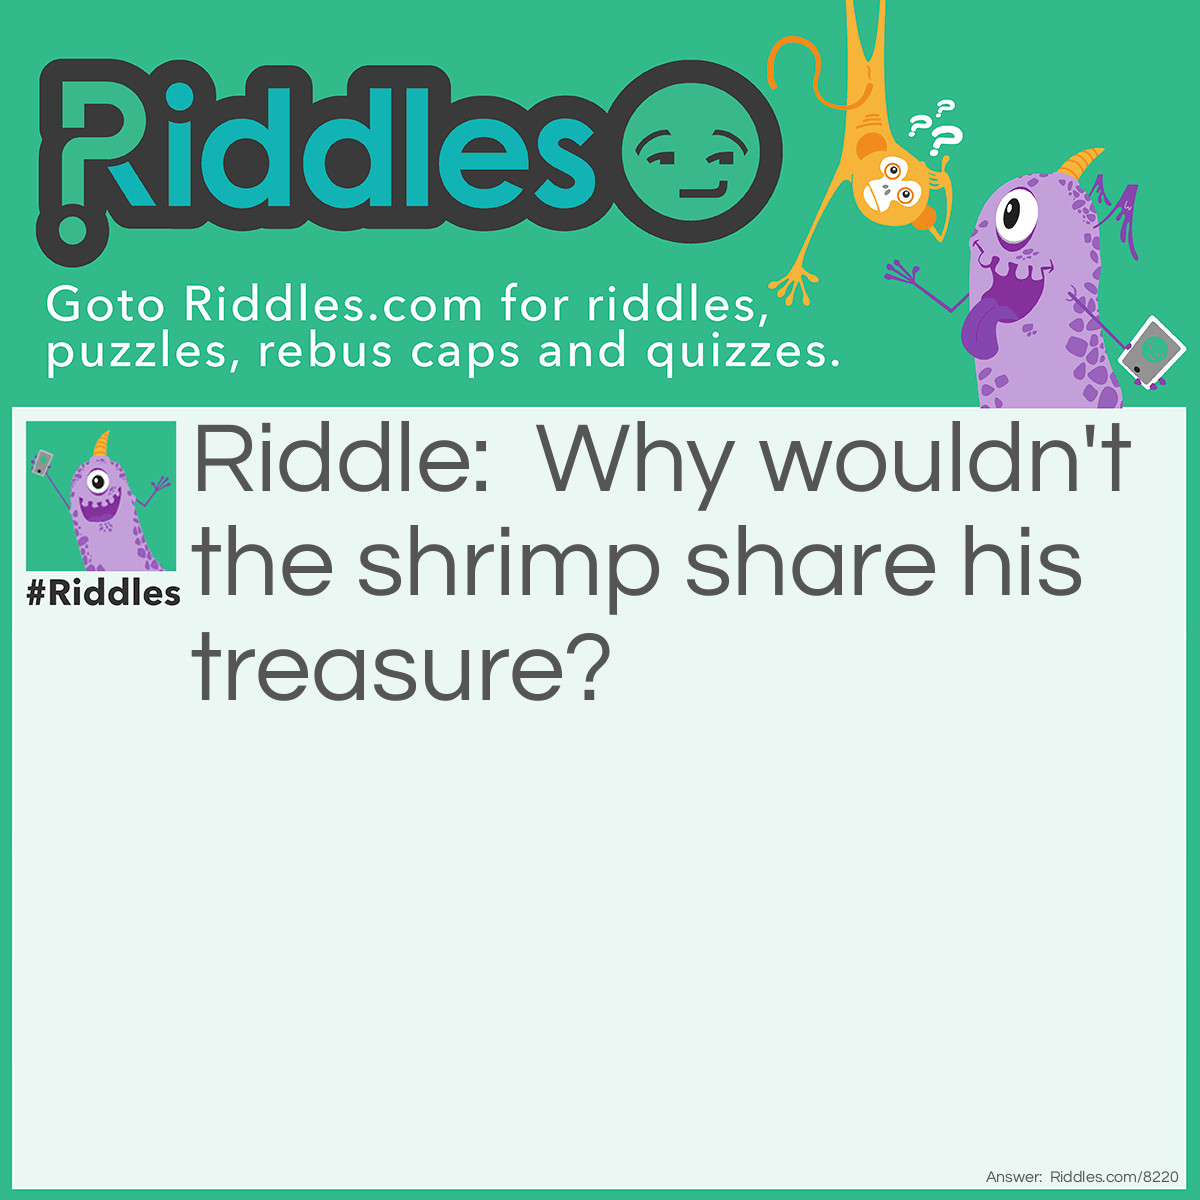 Riddle: Why wouldn't the shrimp share his treasure? Answer: Because he was a little shellfish.